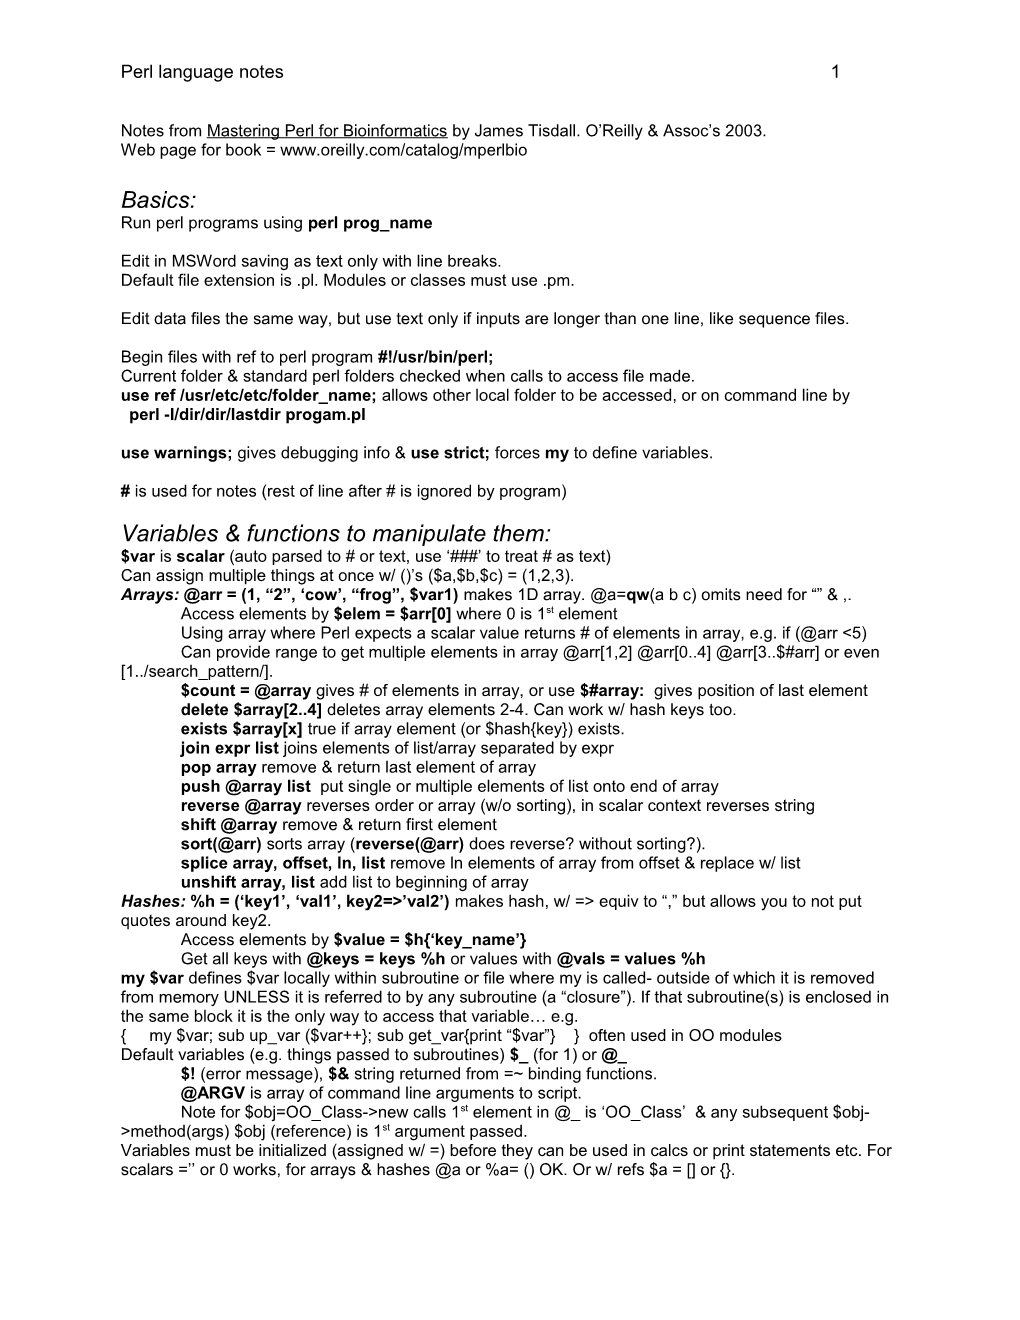 Notes from Mastering Perl for Bioinformatics by James Tisdall. O Reilly & Assoc S 2003